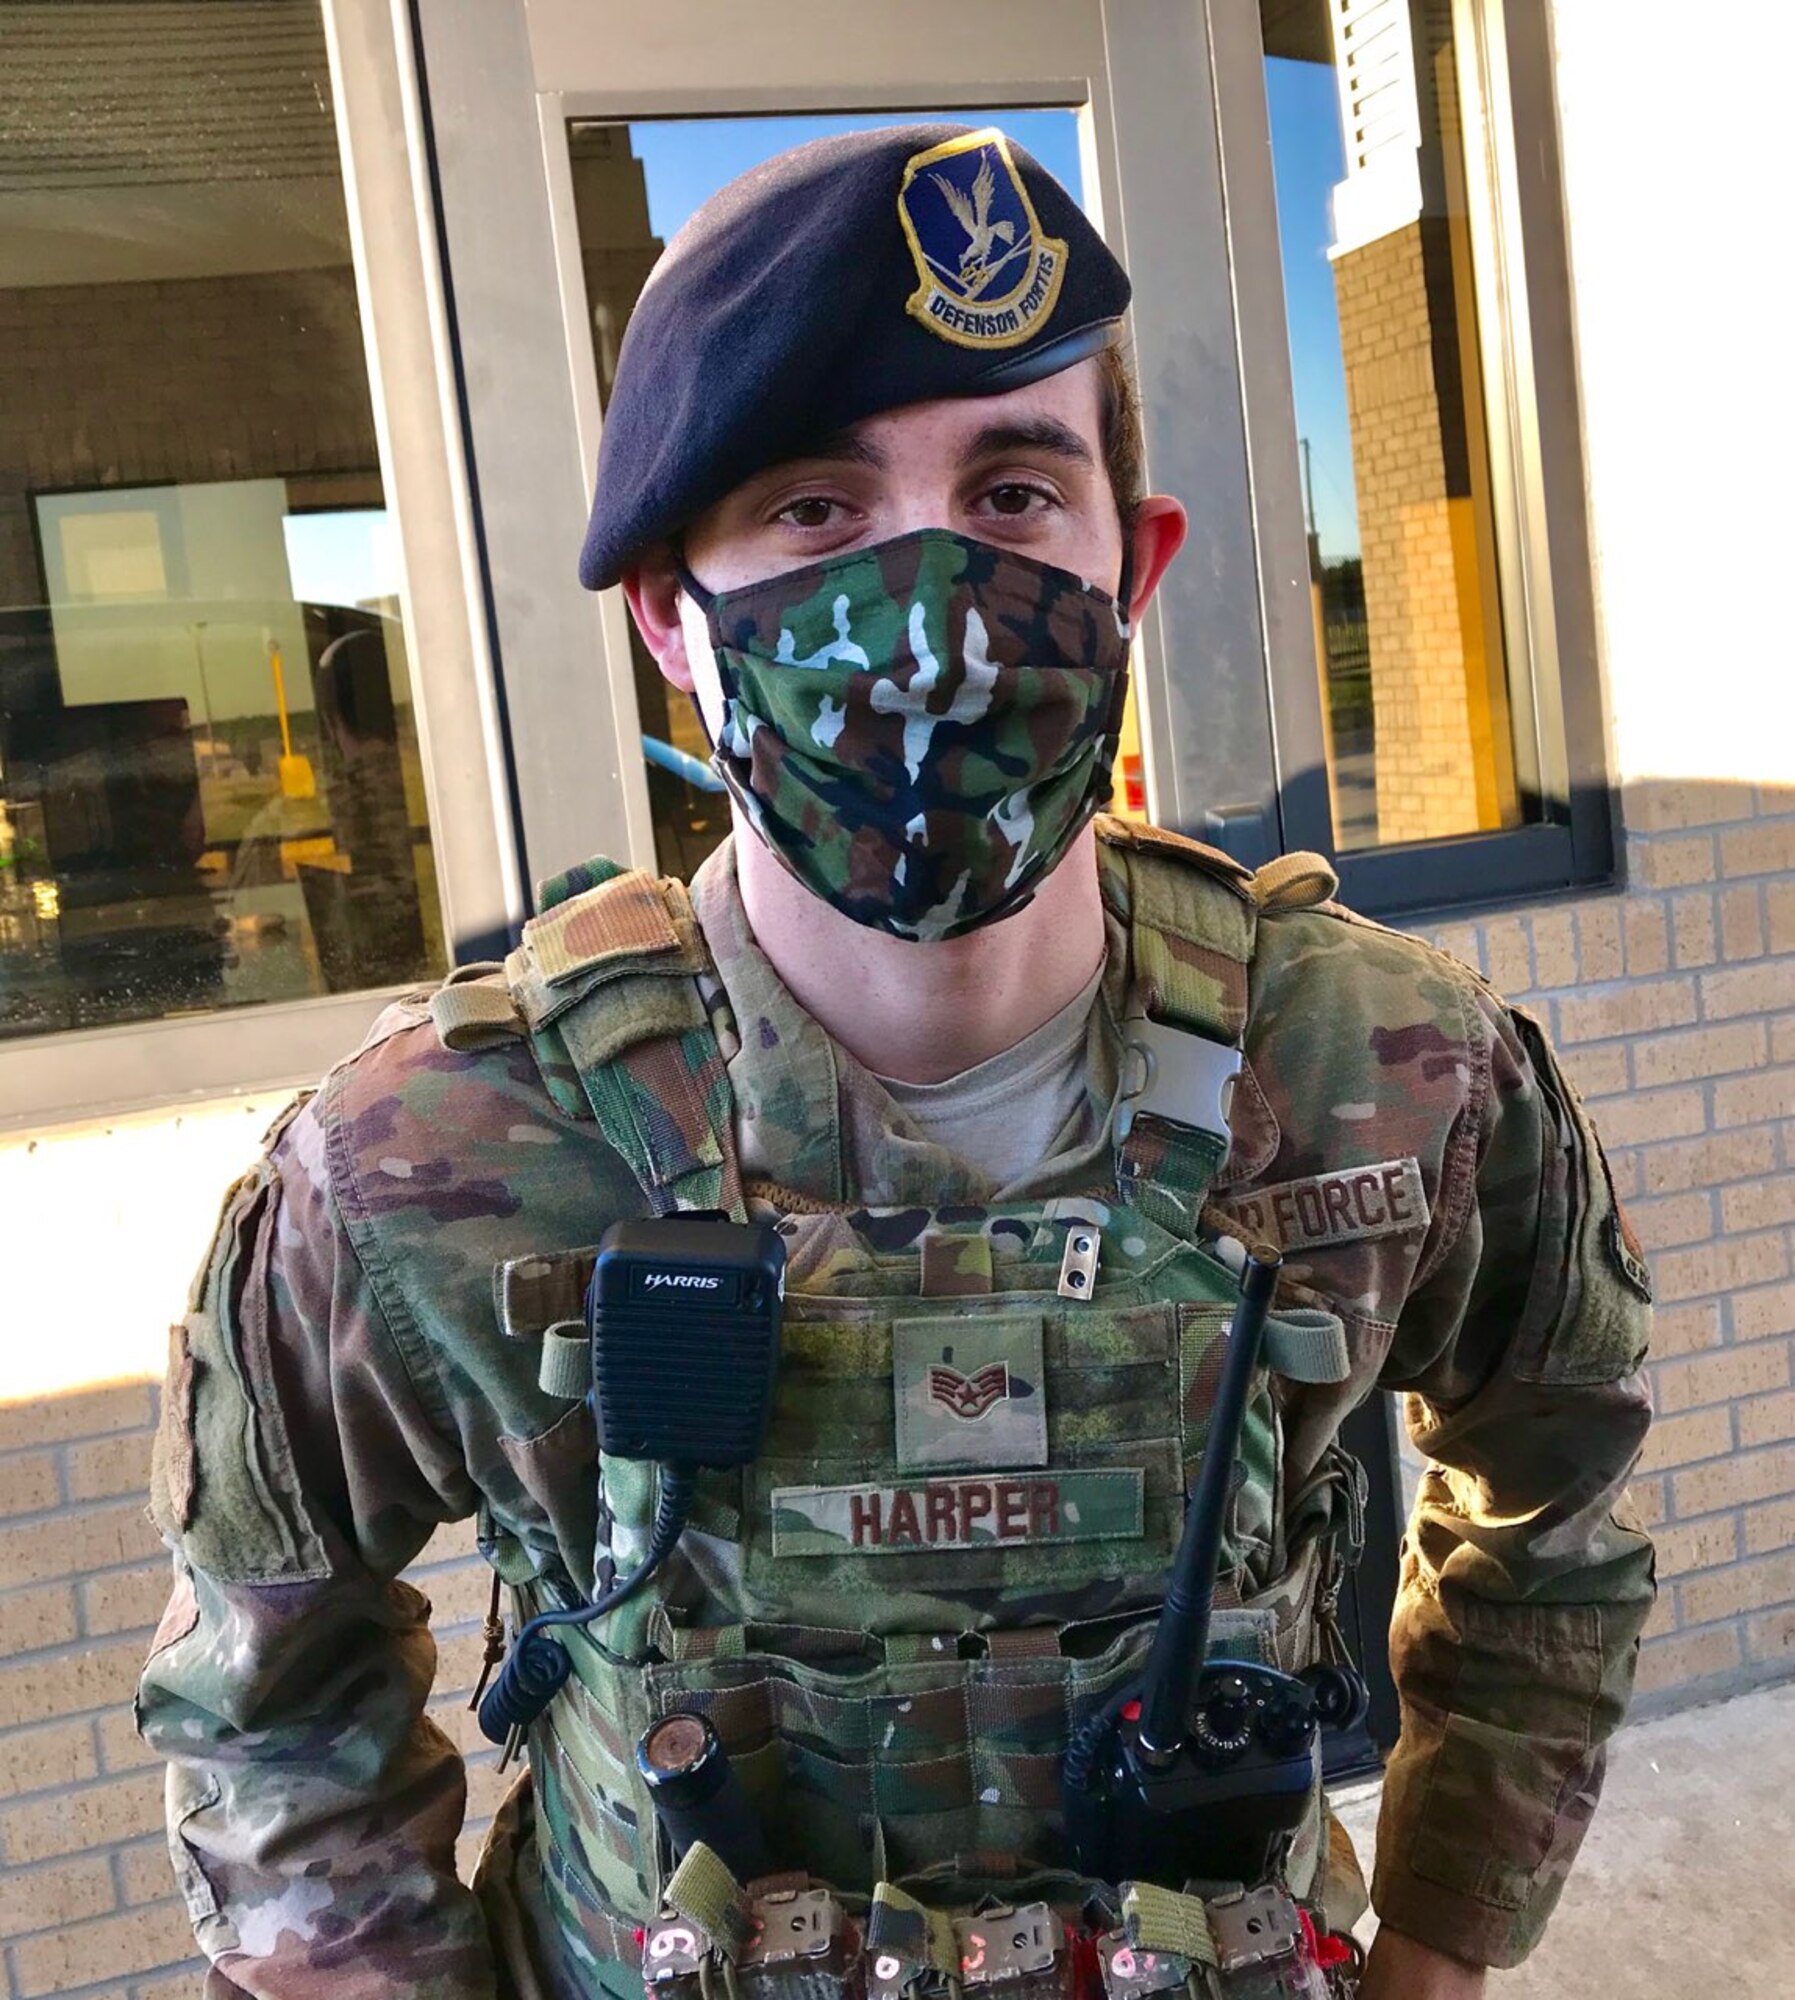 Staff Sgt. Justin Harper, 186th Security Forces Squadron journeyman, works security at the front gate while wearing a hand-made face mask at Key Field Air National Guard Base, Meridian, Mississippi, May 6, 2020.